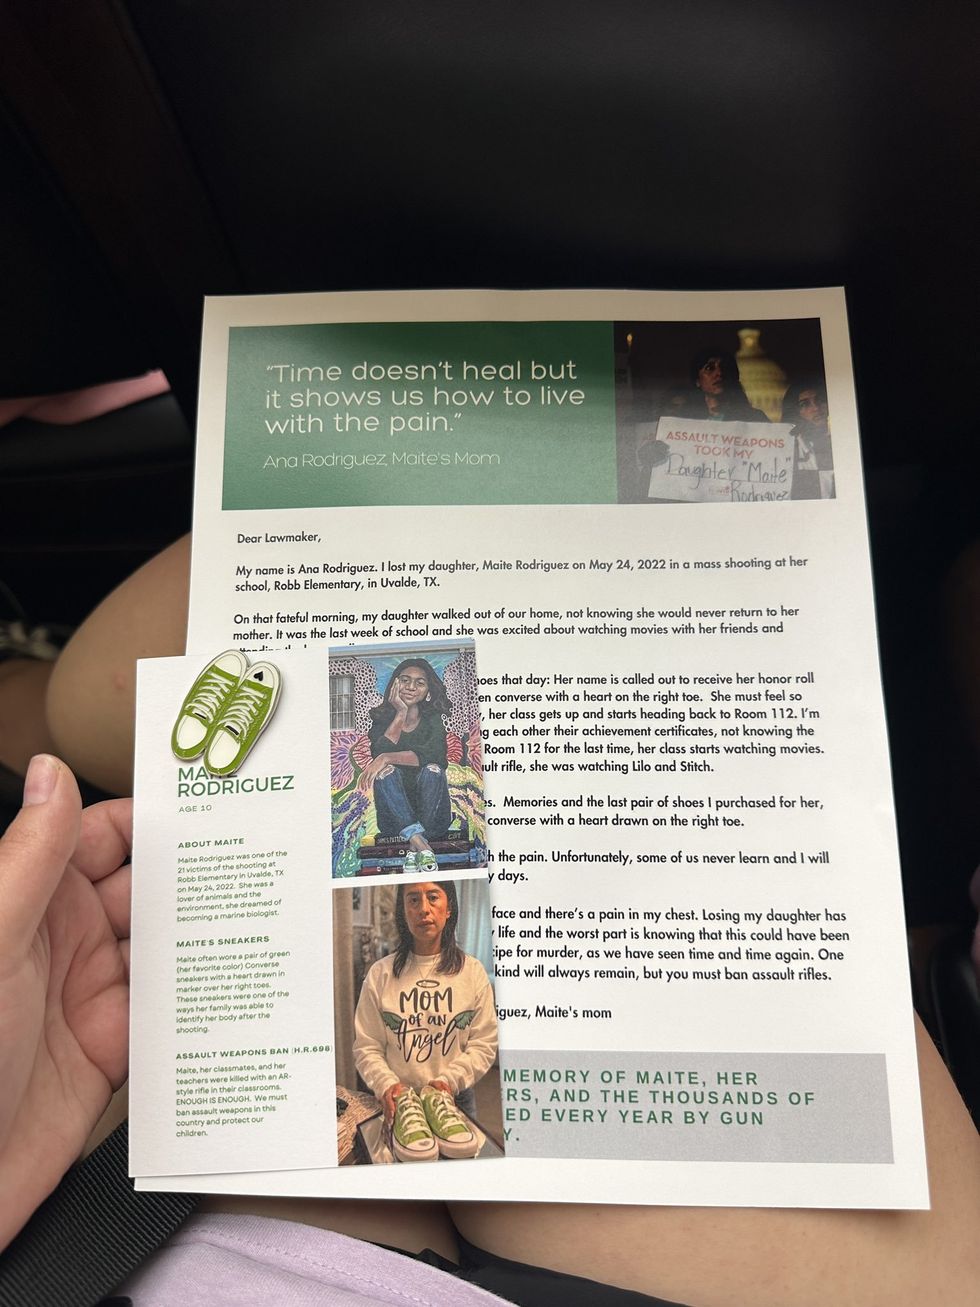 Twitter screenshot of pin and pamphlet about Uvalde victim Maite Rodriguez